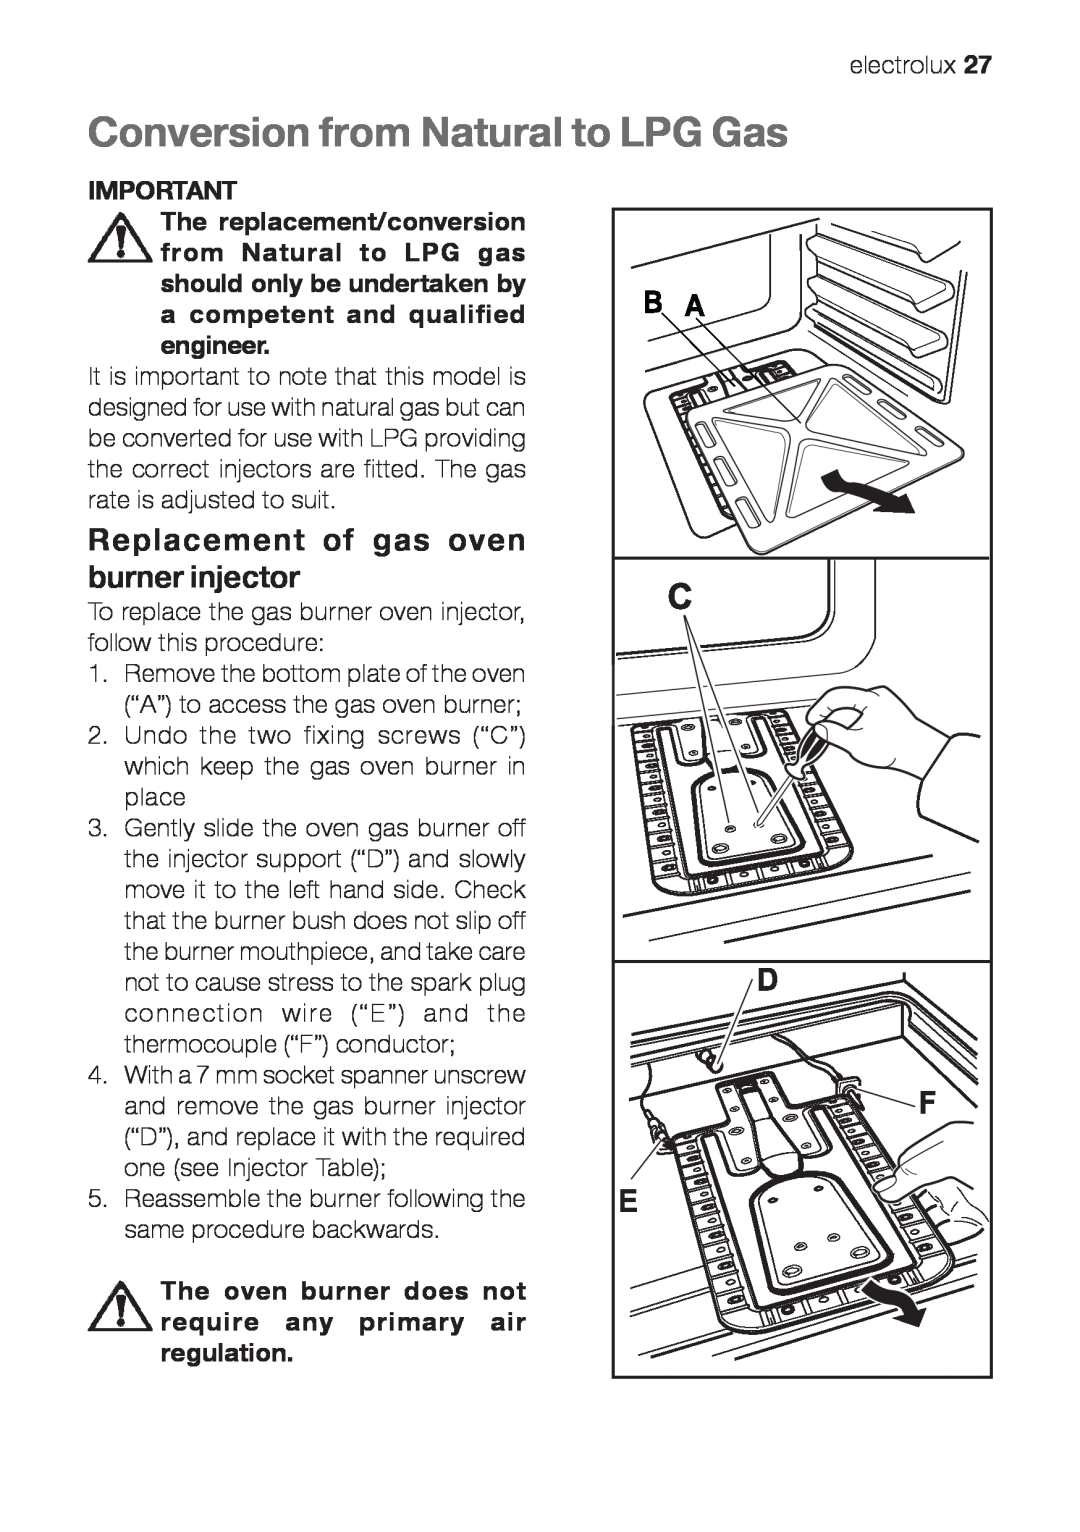 Electrolux EOG 10000 user manual Conversion from Natural to LPG Gas, Replacement of gas oven burner injector 